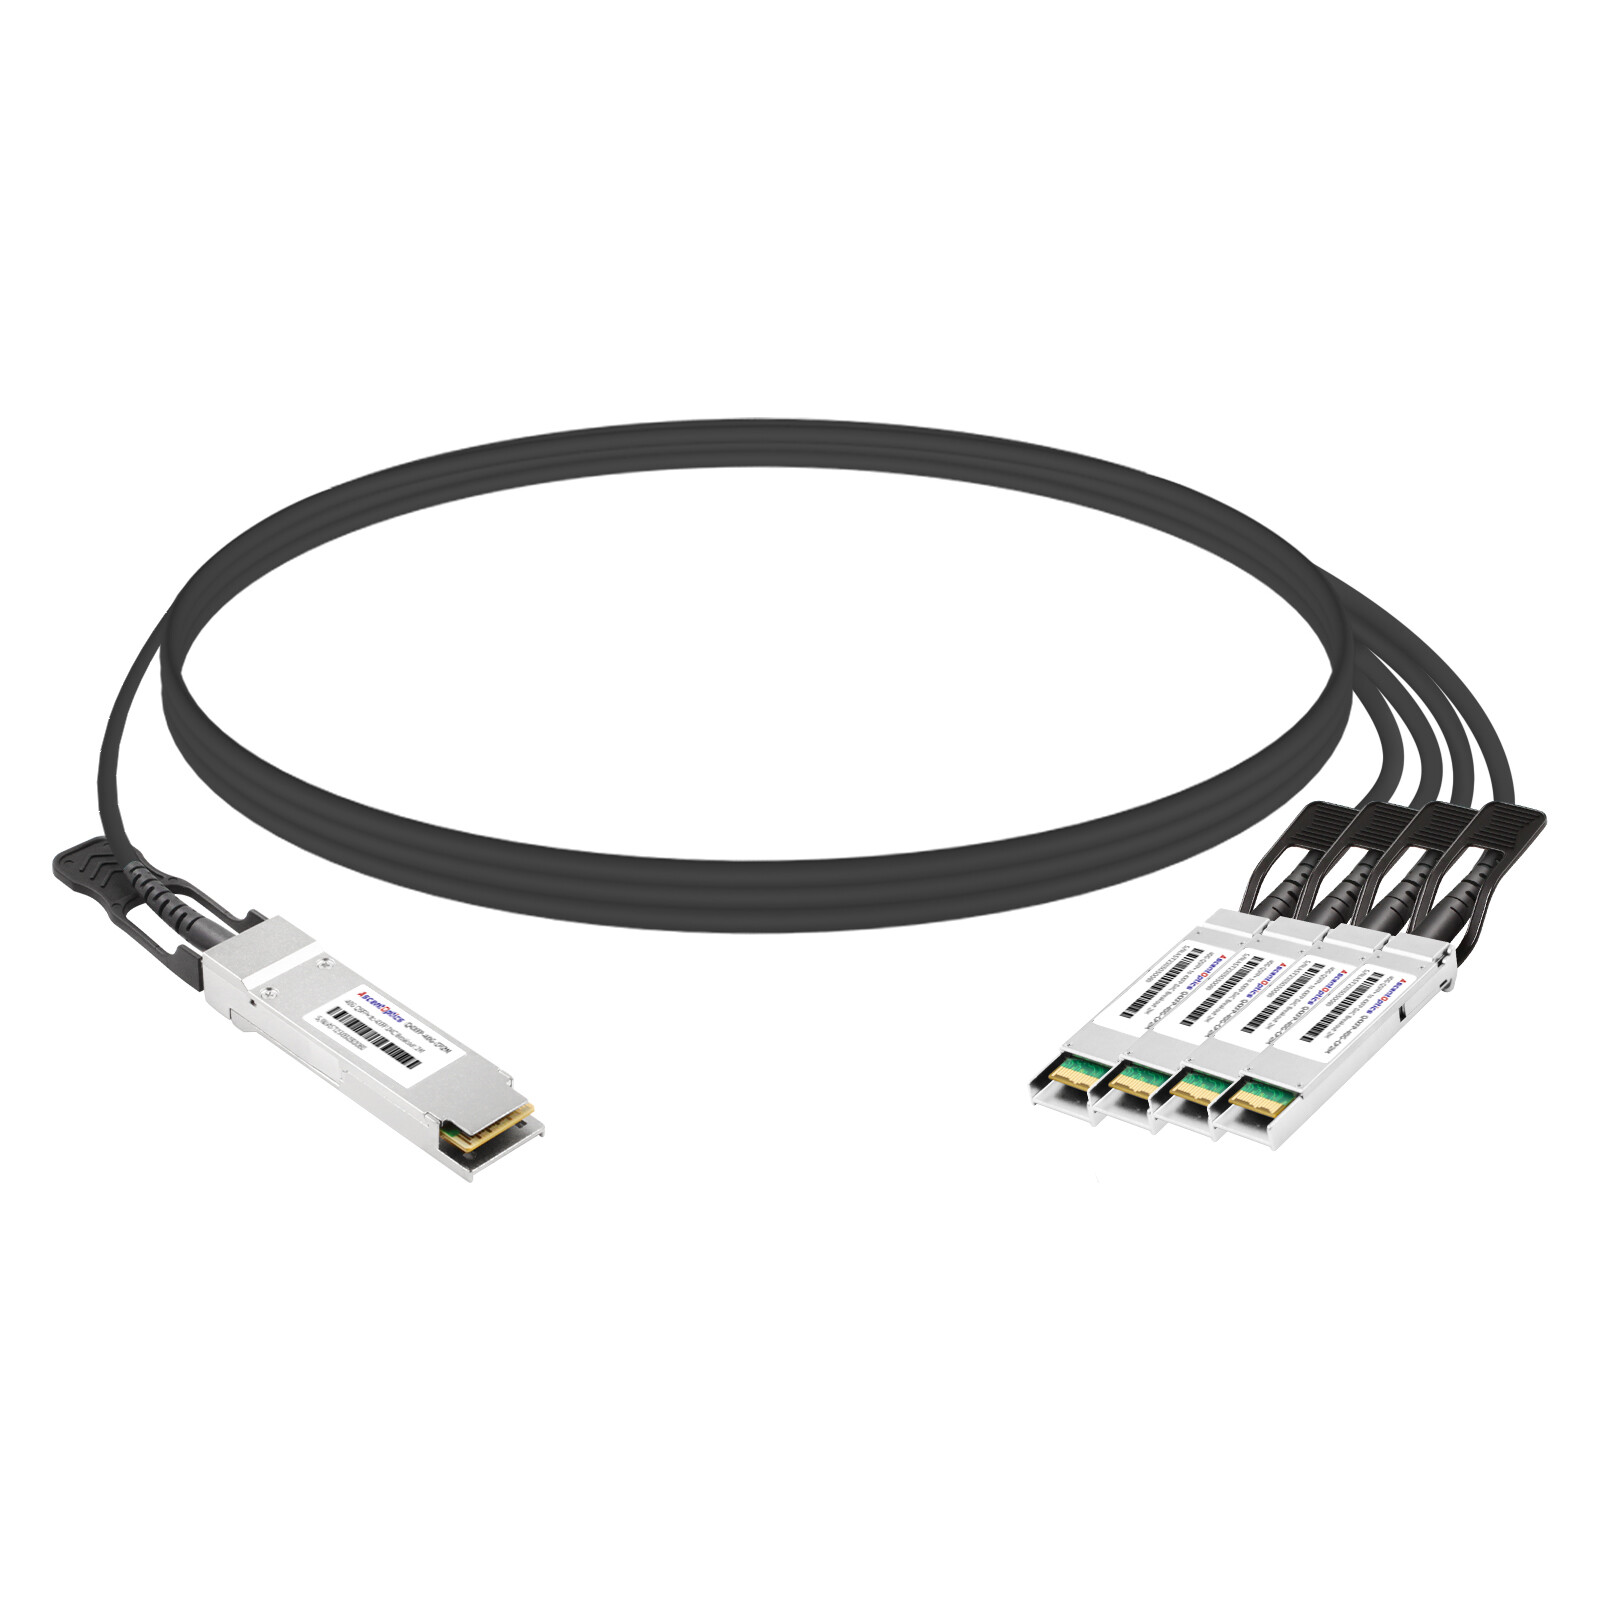 40G QSFP+ to 4x 10G XFP Copper Breakout Cable,2 Meters,Passive